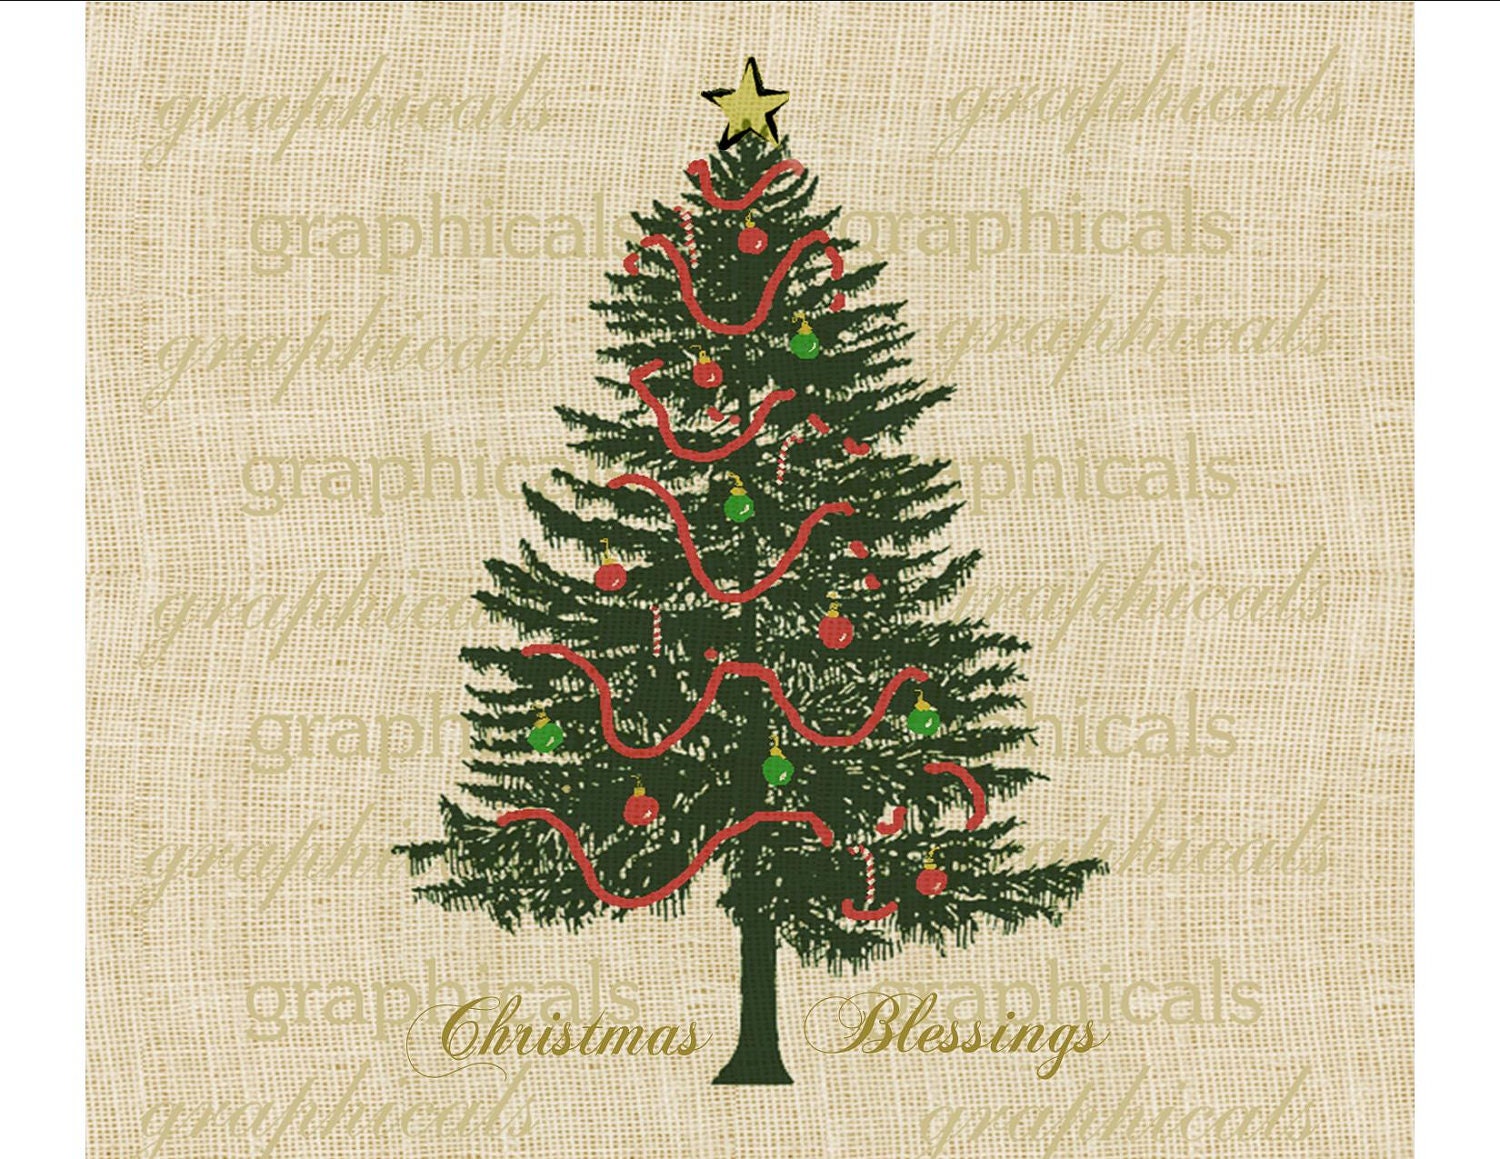 Christmas tree Red Green ornaments Digital download image for iron on fabric transfer burlap decoupage pillows cards papercraft No. 1784 - graphicals